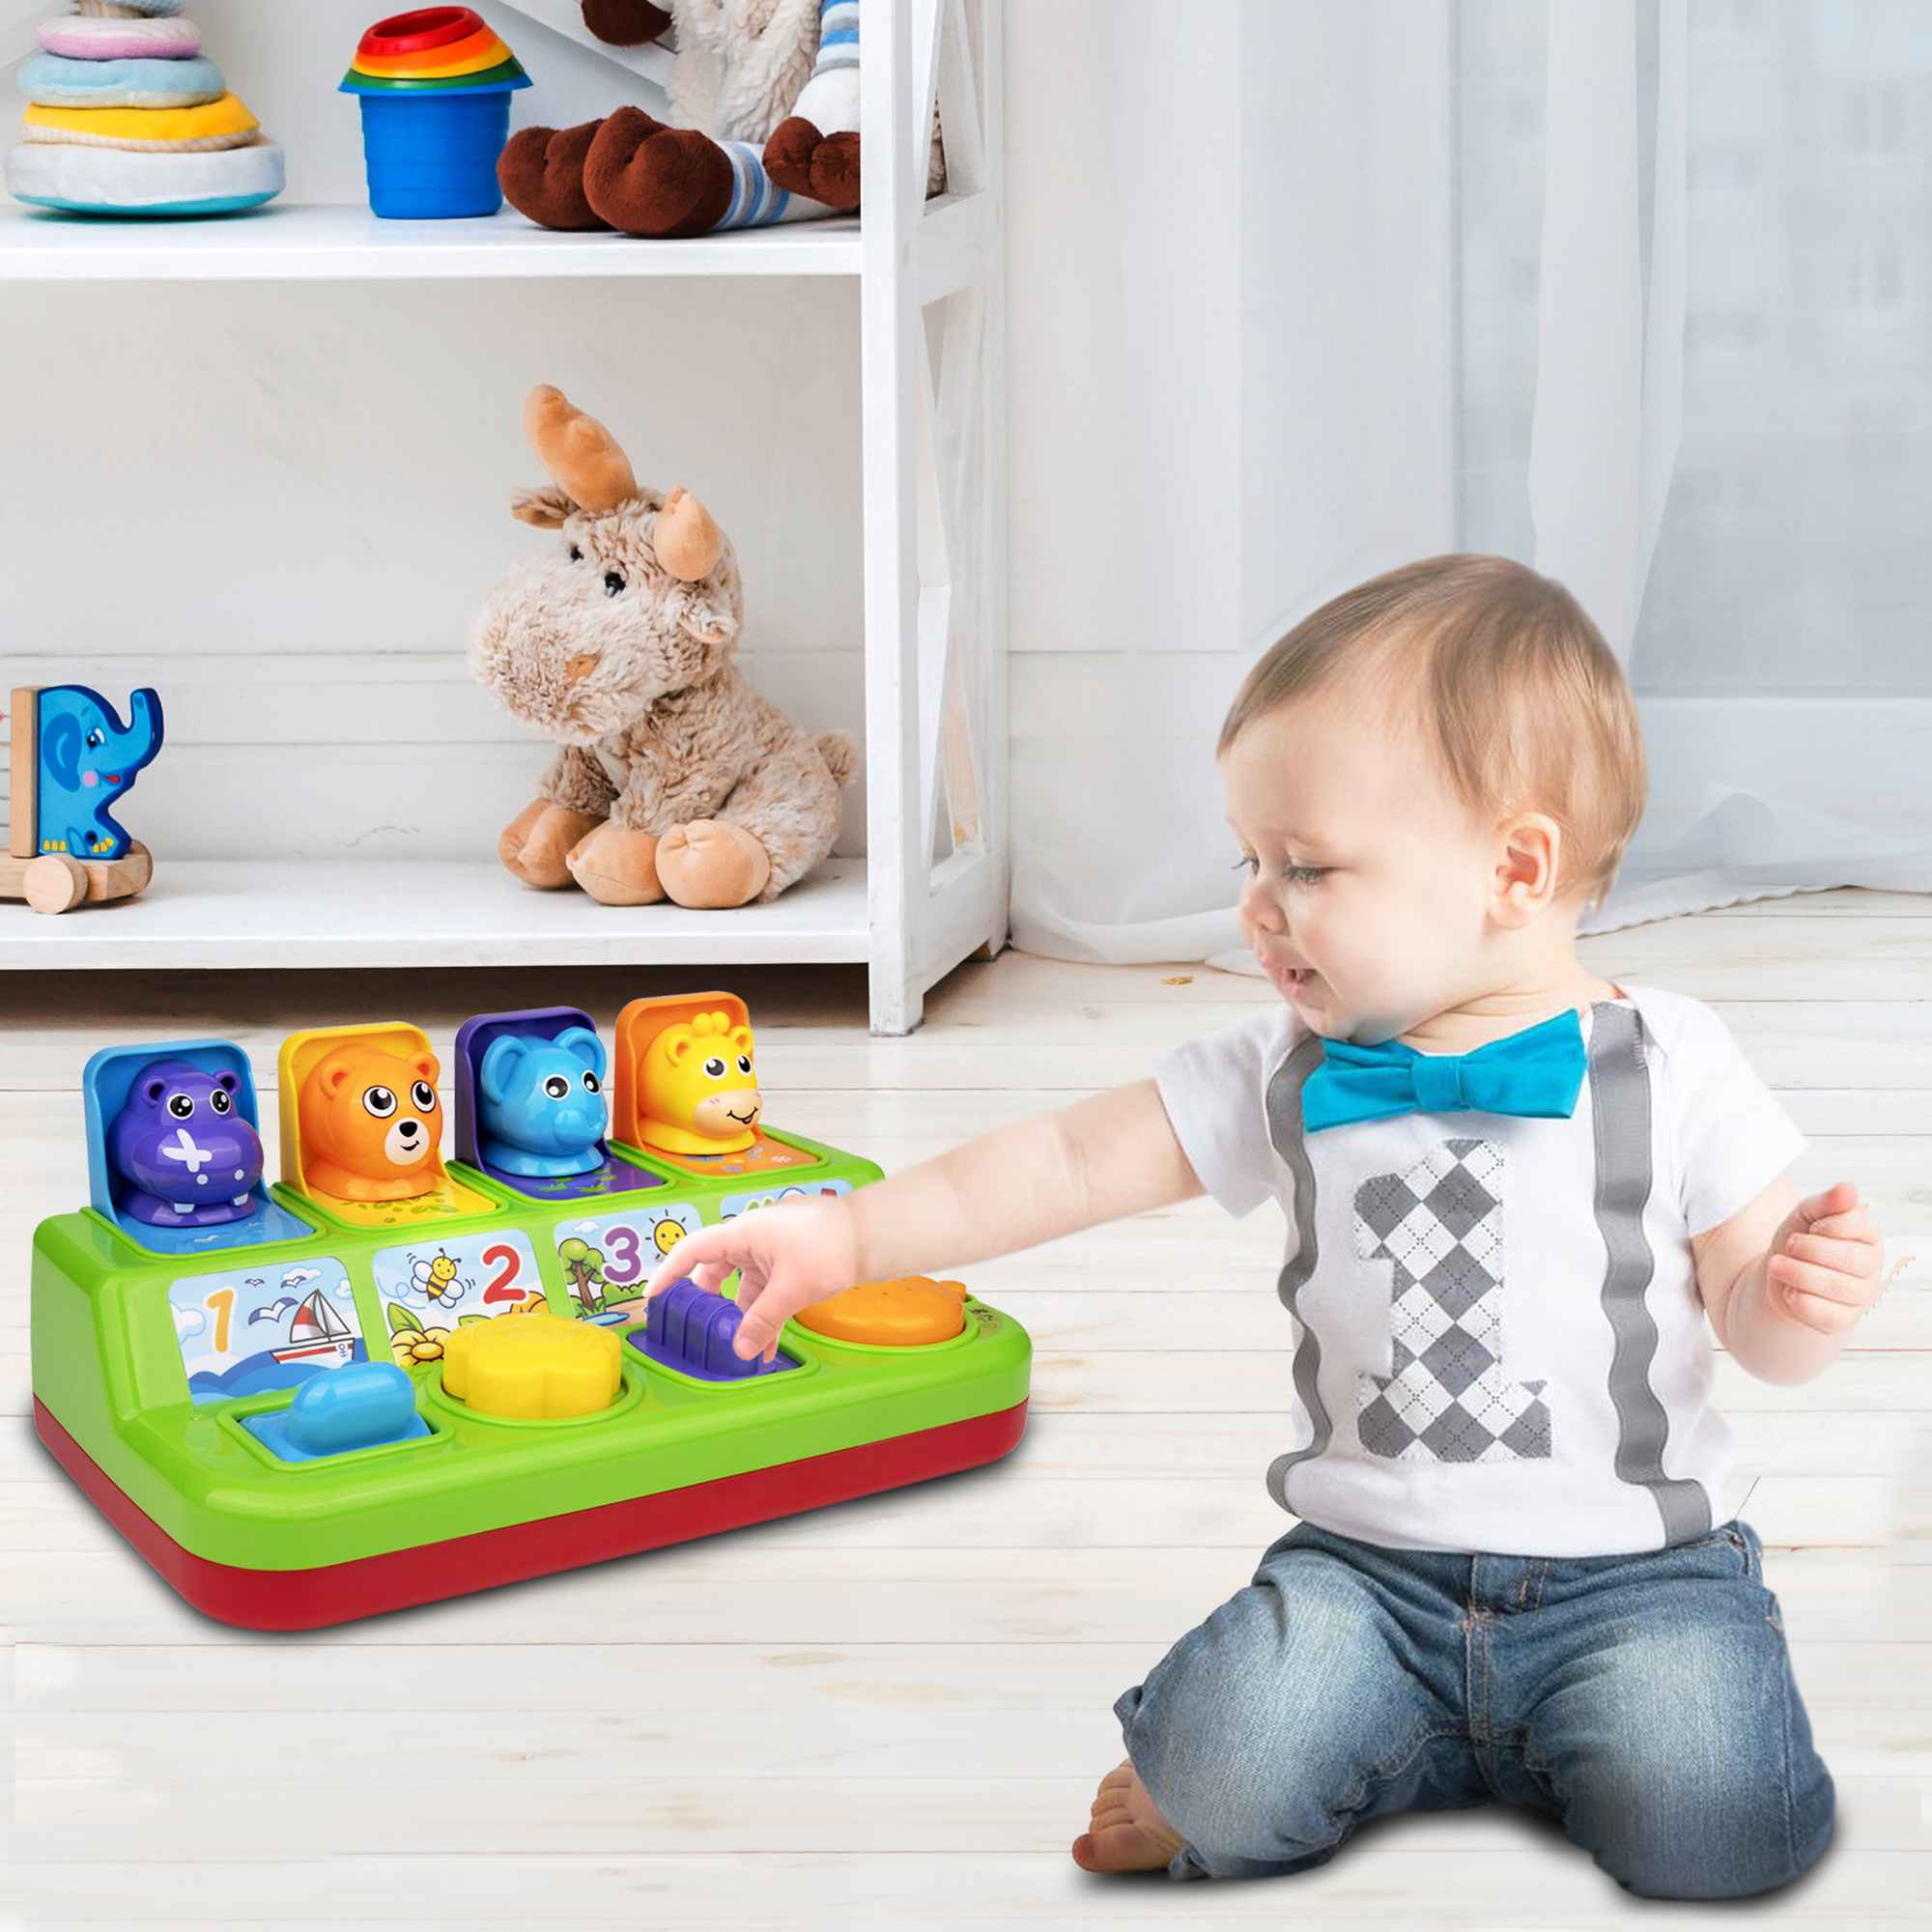 Playkidz Baby Pop Up Toy, Toddler Music Cause & Effect Toys, Interactive Animal Sounds, 10 month old baby -1 year old boy & girl - image 1 of 6